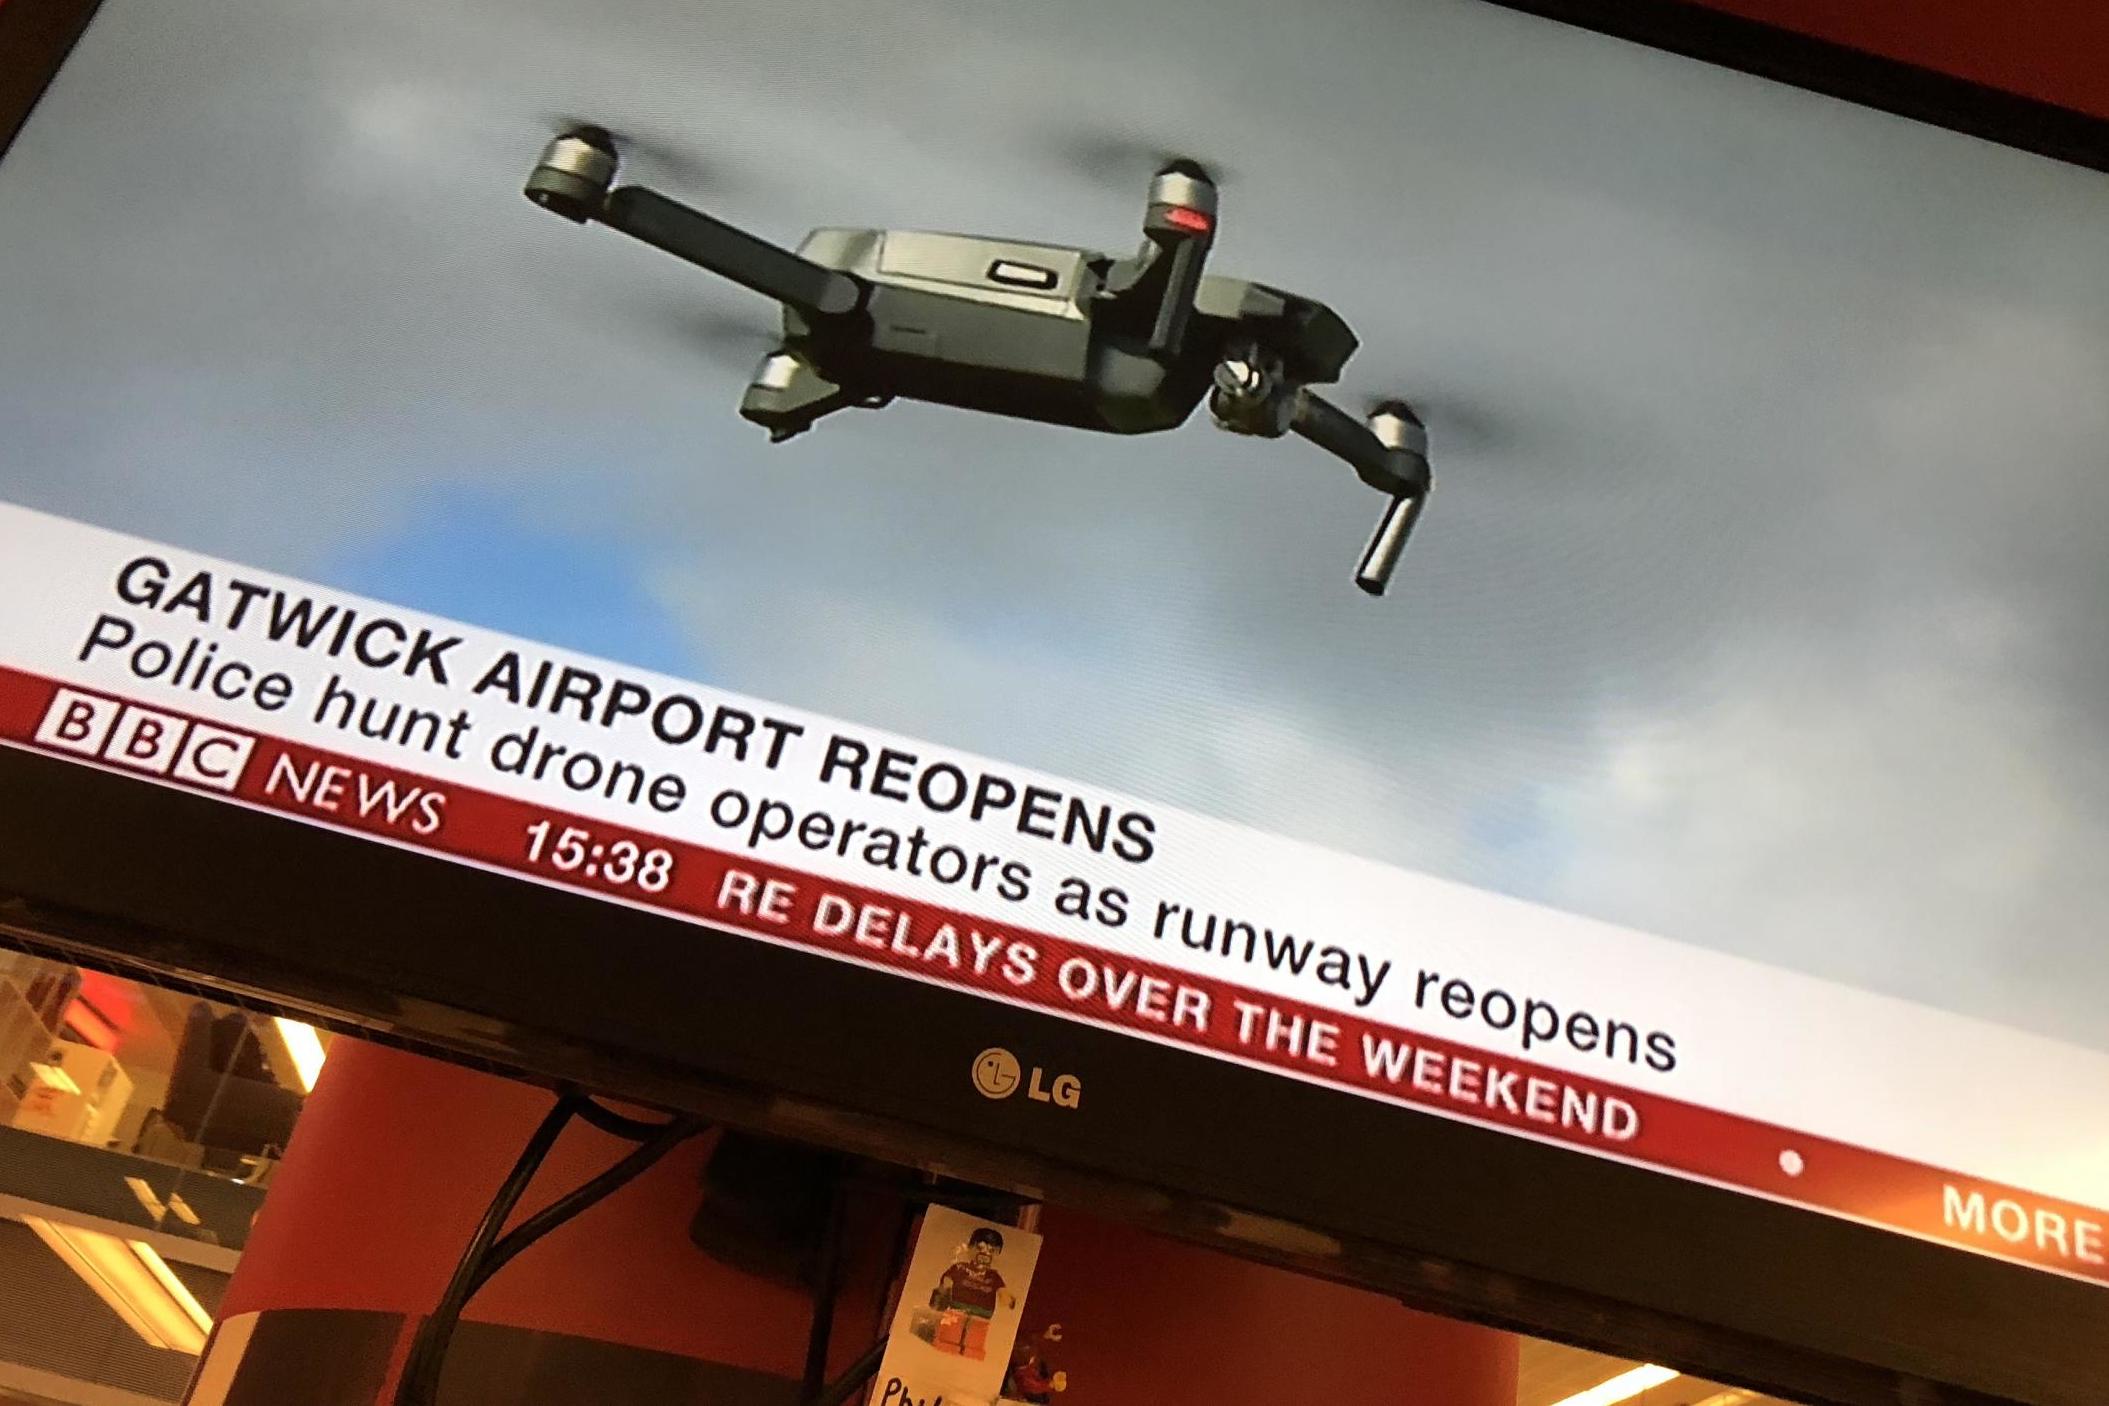 Drone watch: how the BBC announced the re-opening of Gatwick